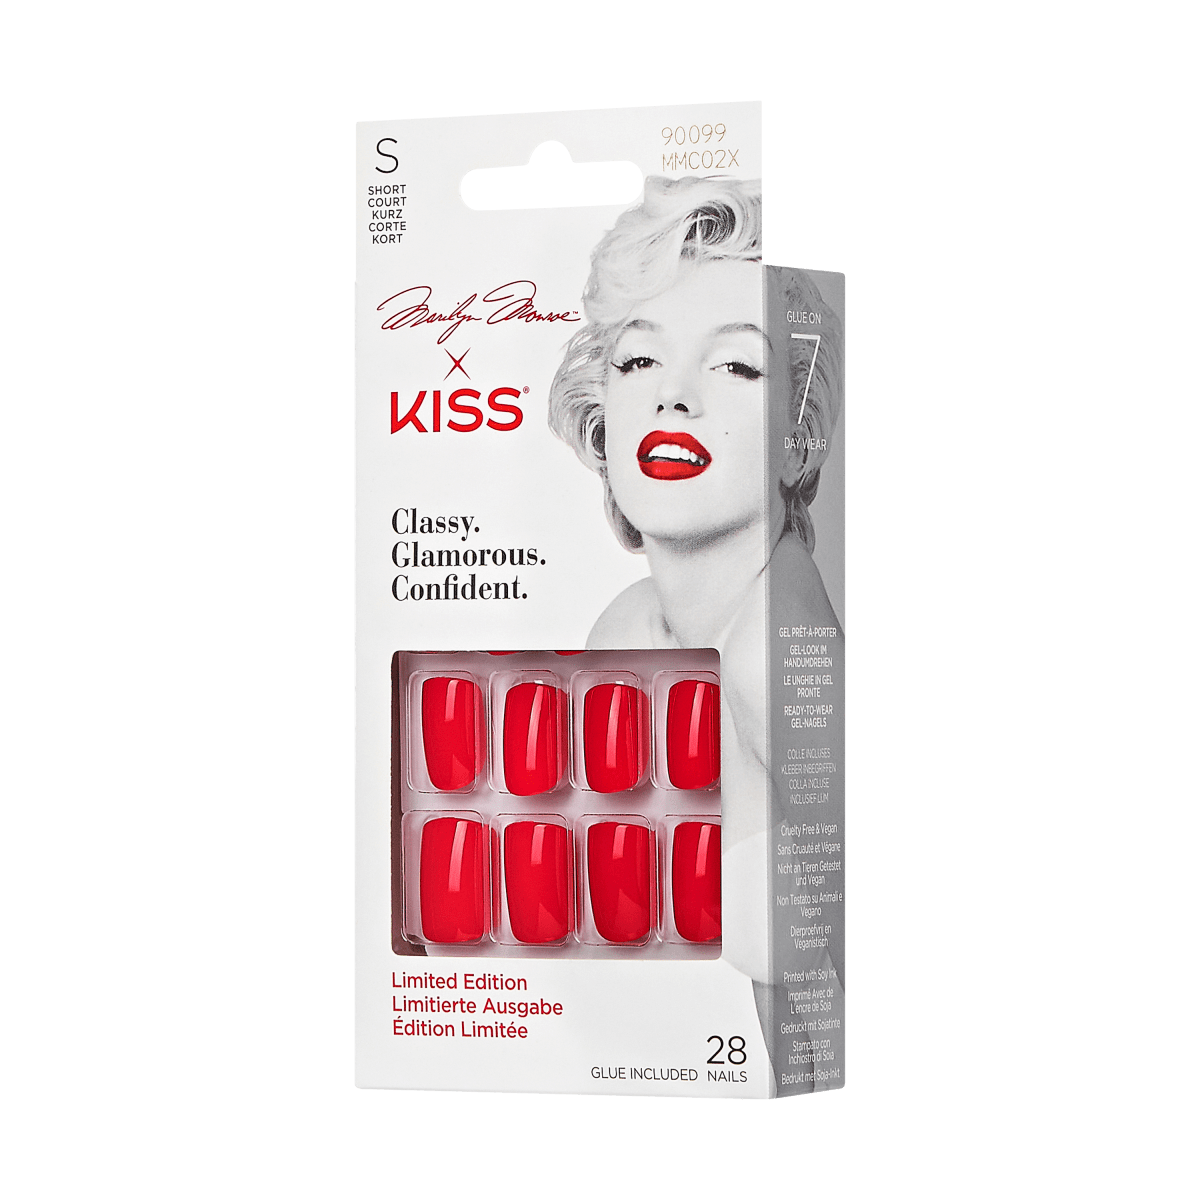 Marilyn Monroe x KISS Limited Edition Press-On Nails, Solid Red, Short Square, 31 Ct.